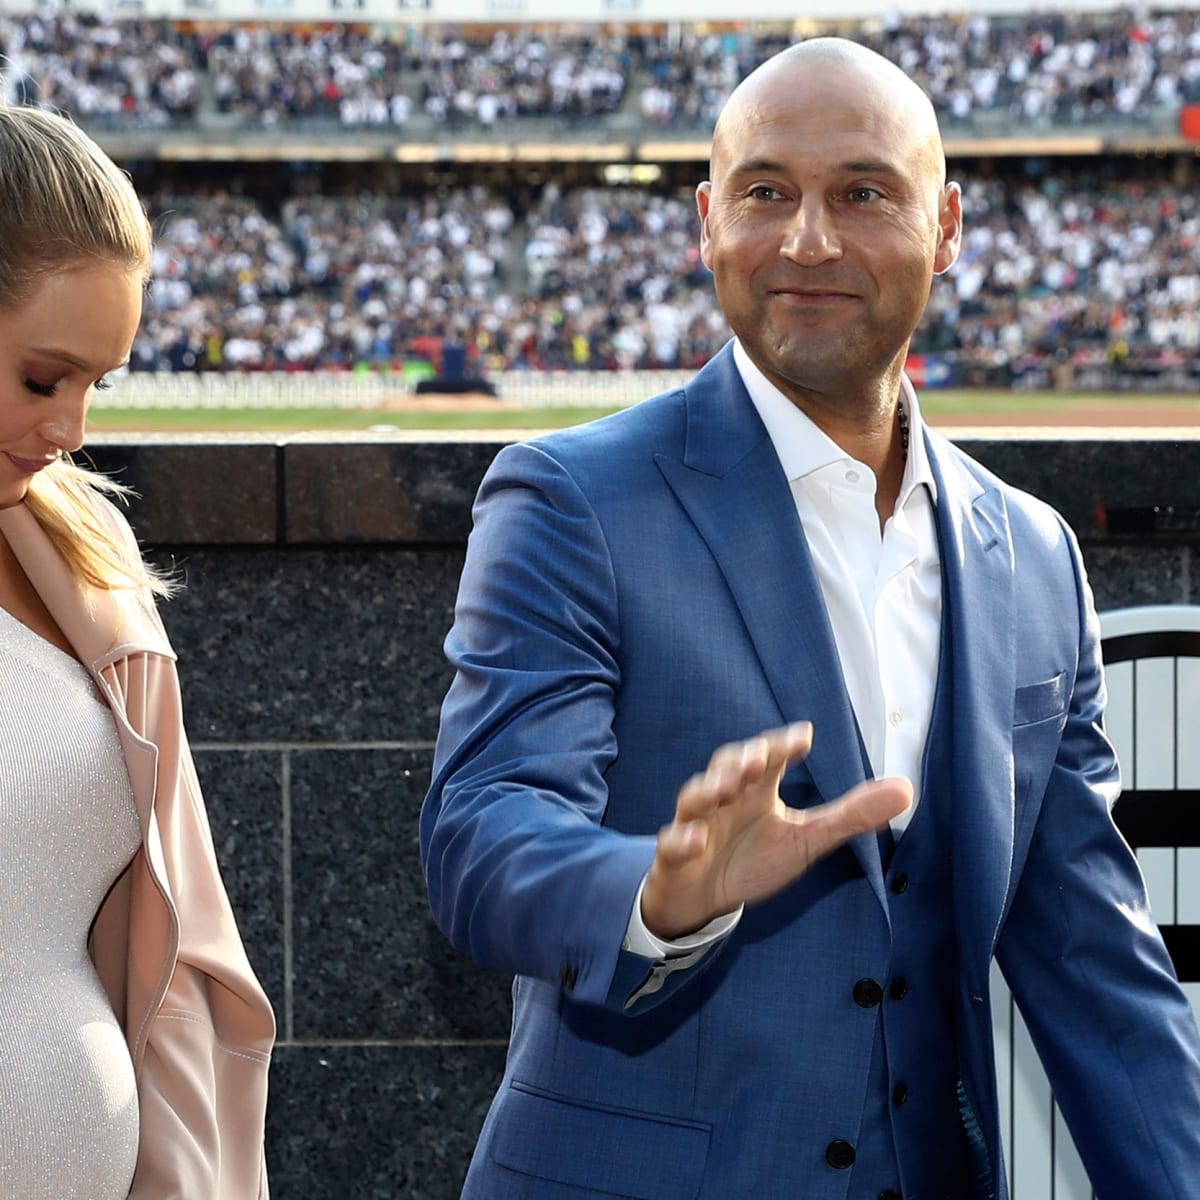 Hannah Davis Sports Baby Bump on Outing With Husband Derek Jeter